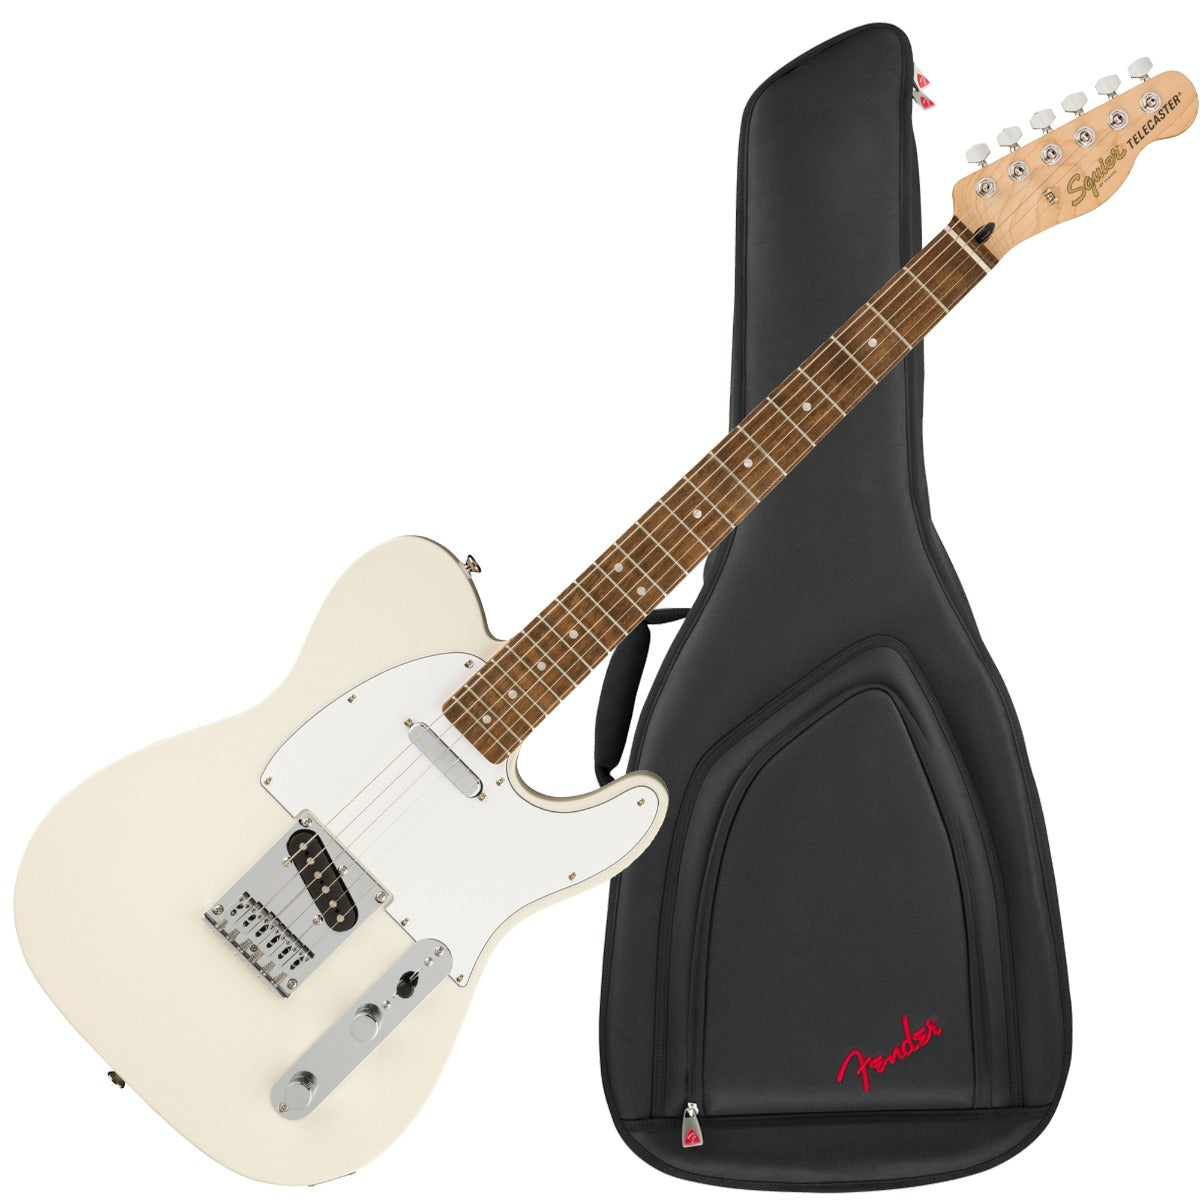 Collage of the components in the Squier Affinity Telecaster - Laurel, Olympic White View PERFORMER PAK bundle